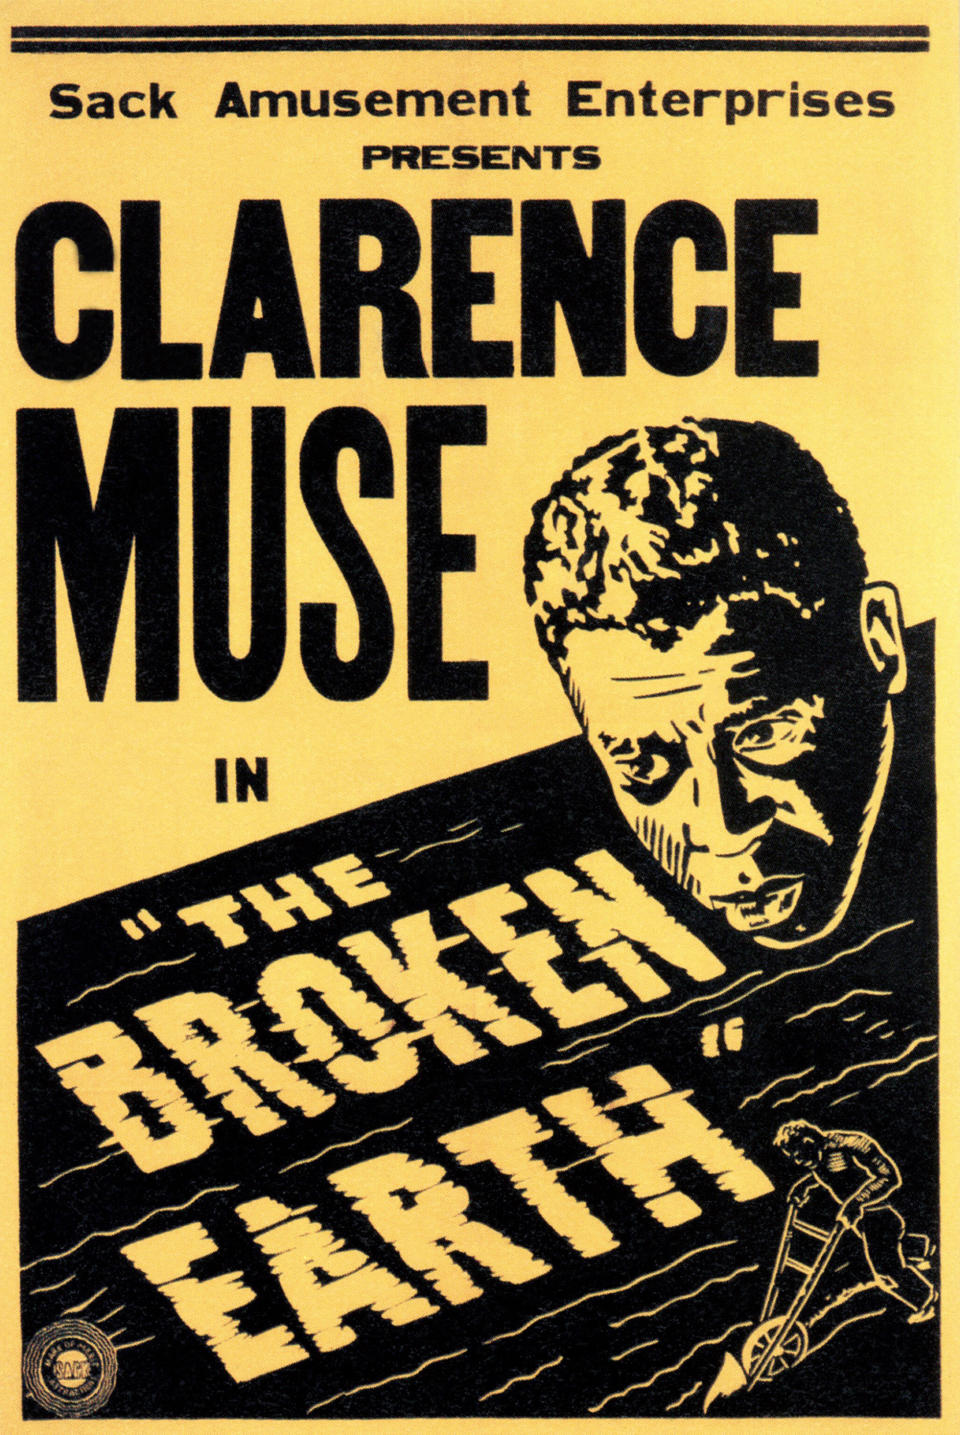 A poster for Clarence Muse in 